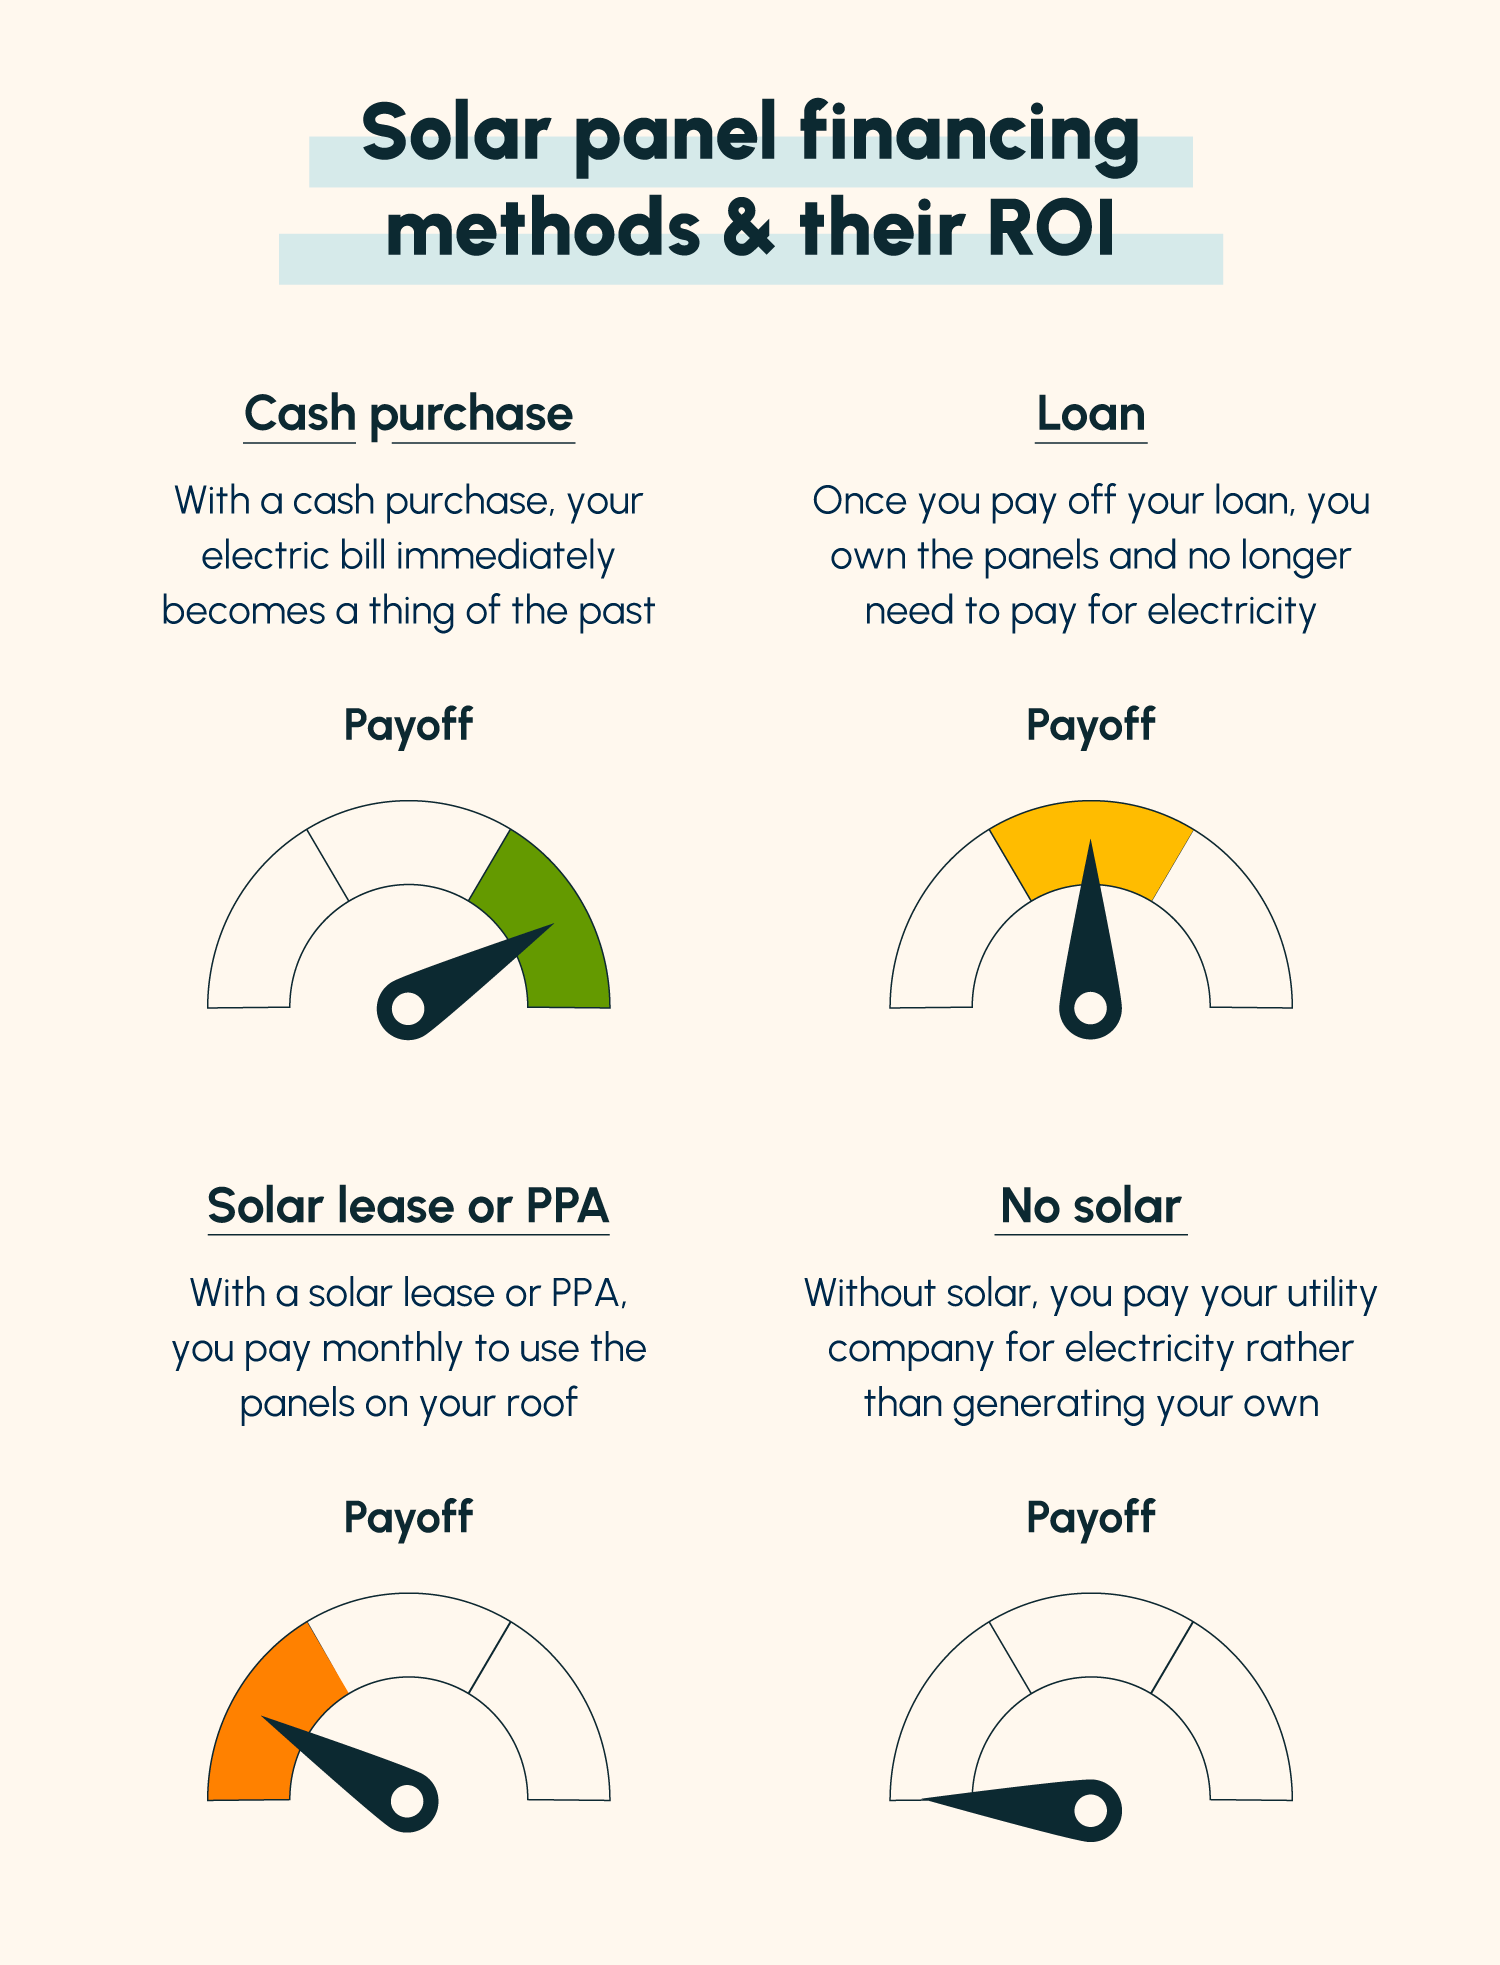 A graph comparing the payoff of purchasing solar and solar leasing, showing a higher ROI with a cash purchase